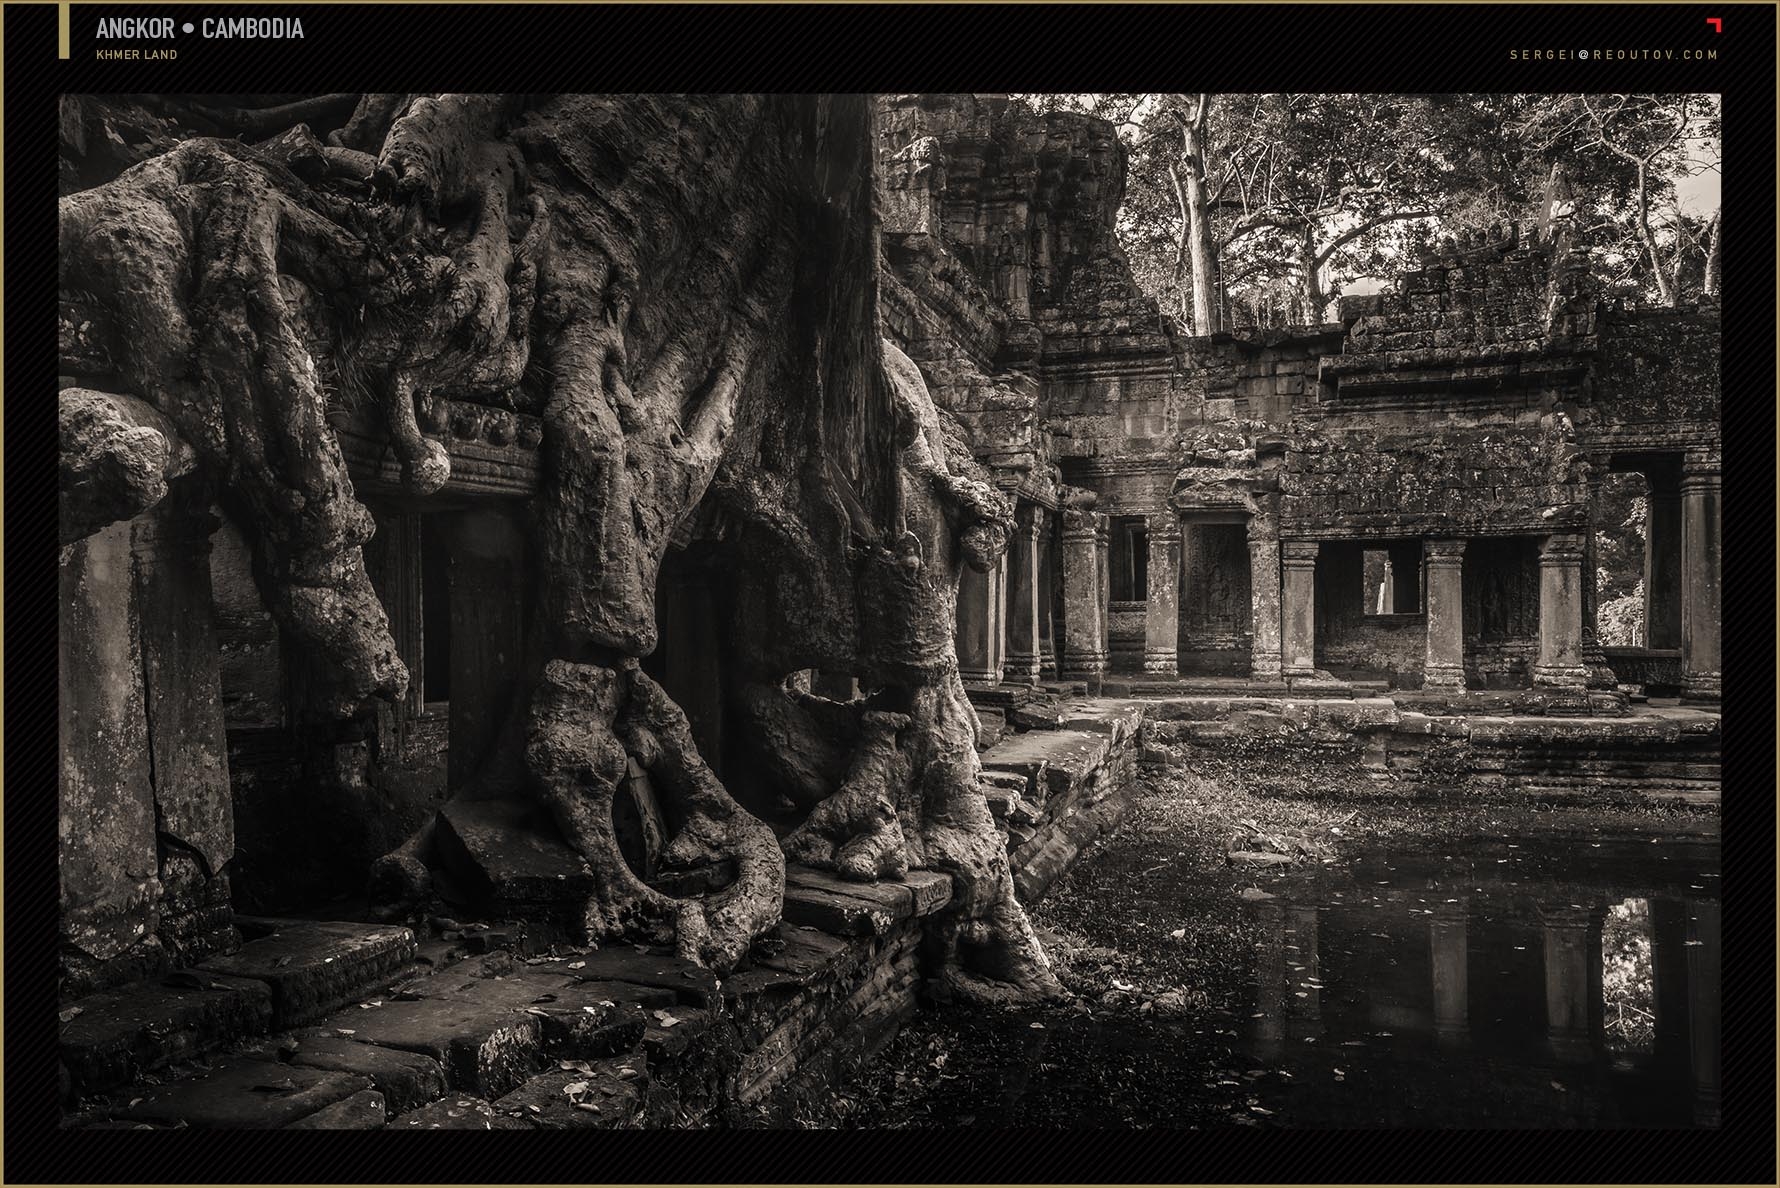 Tree roots with ruins in Cambodia